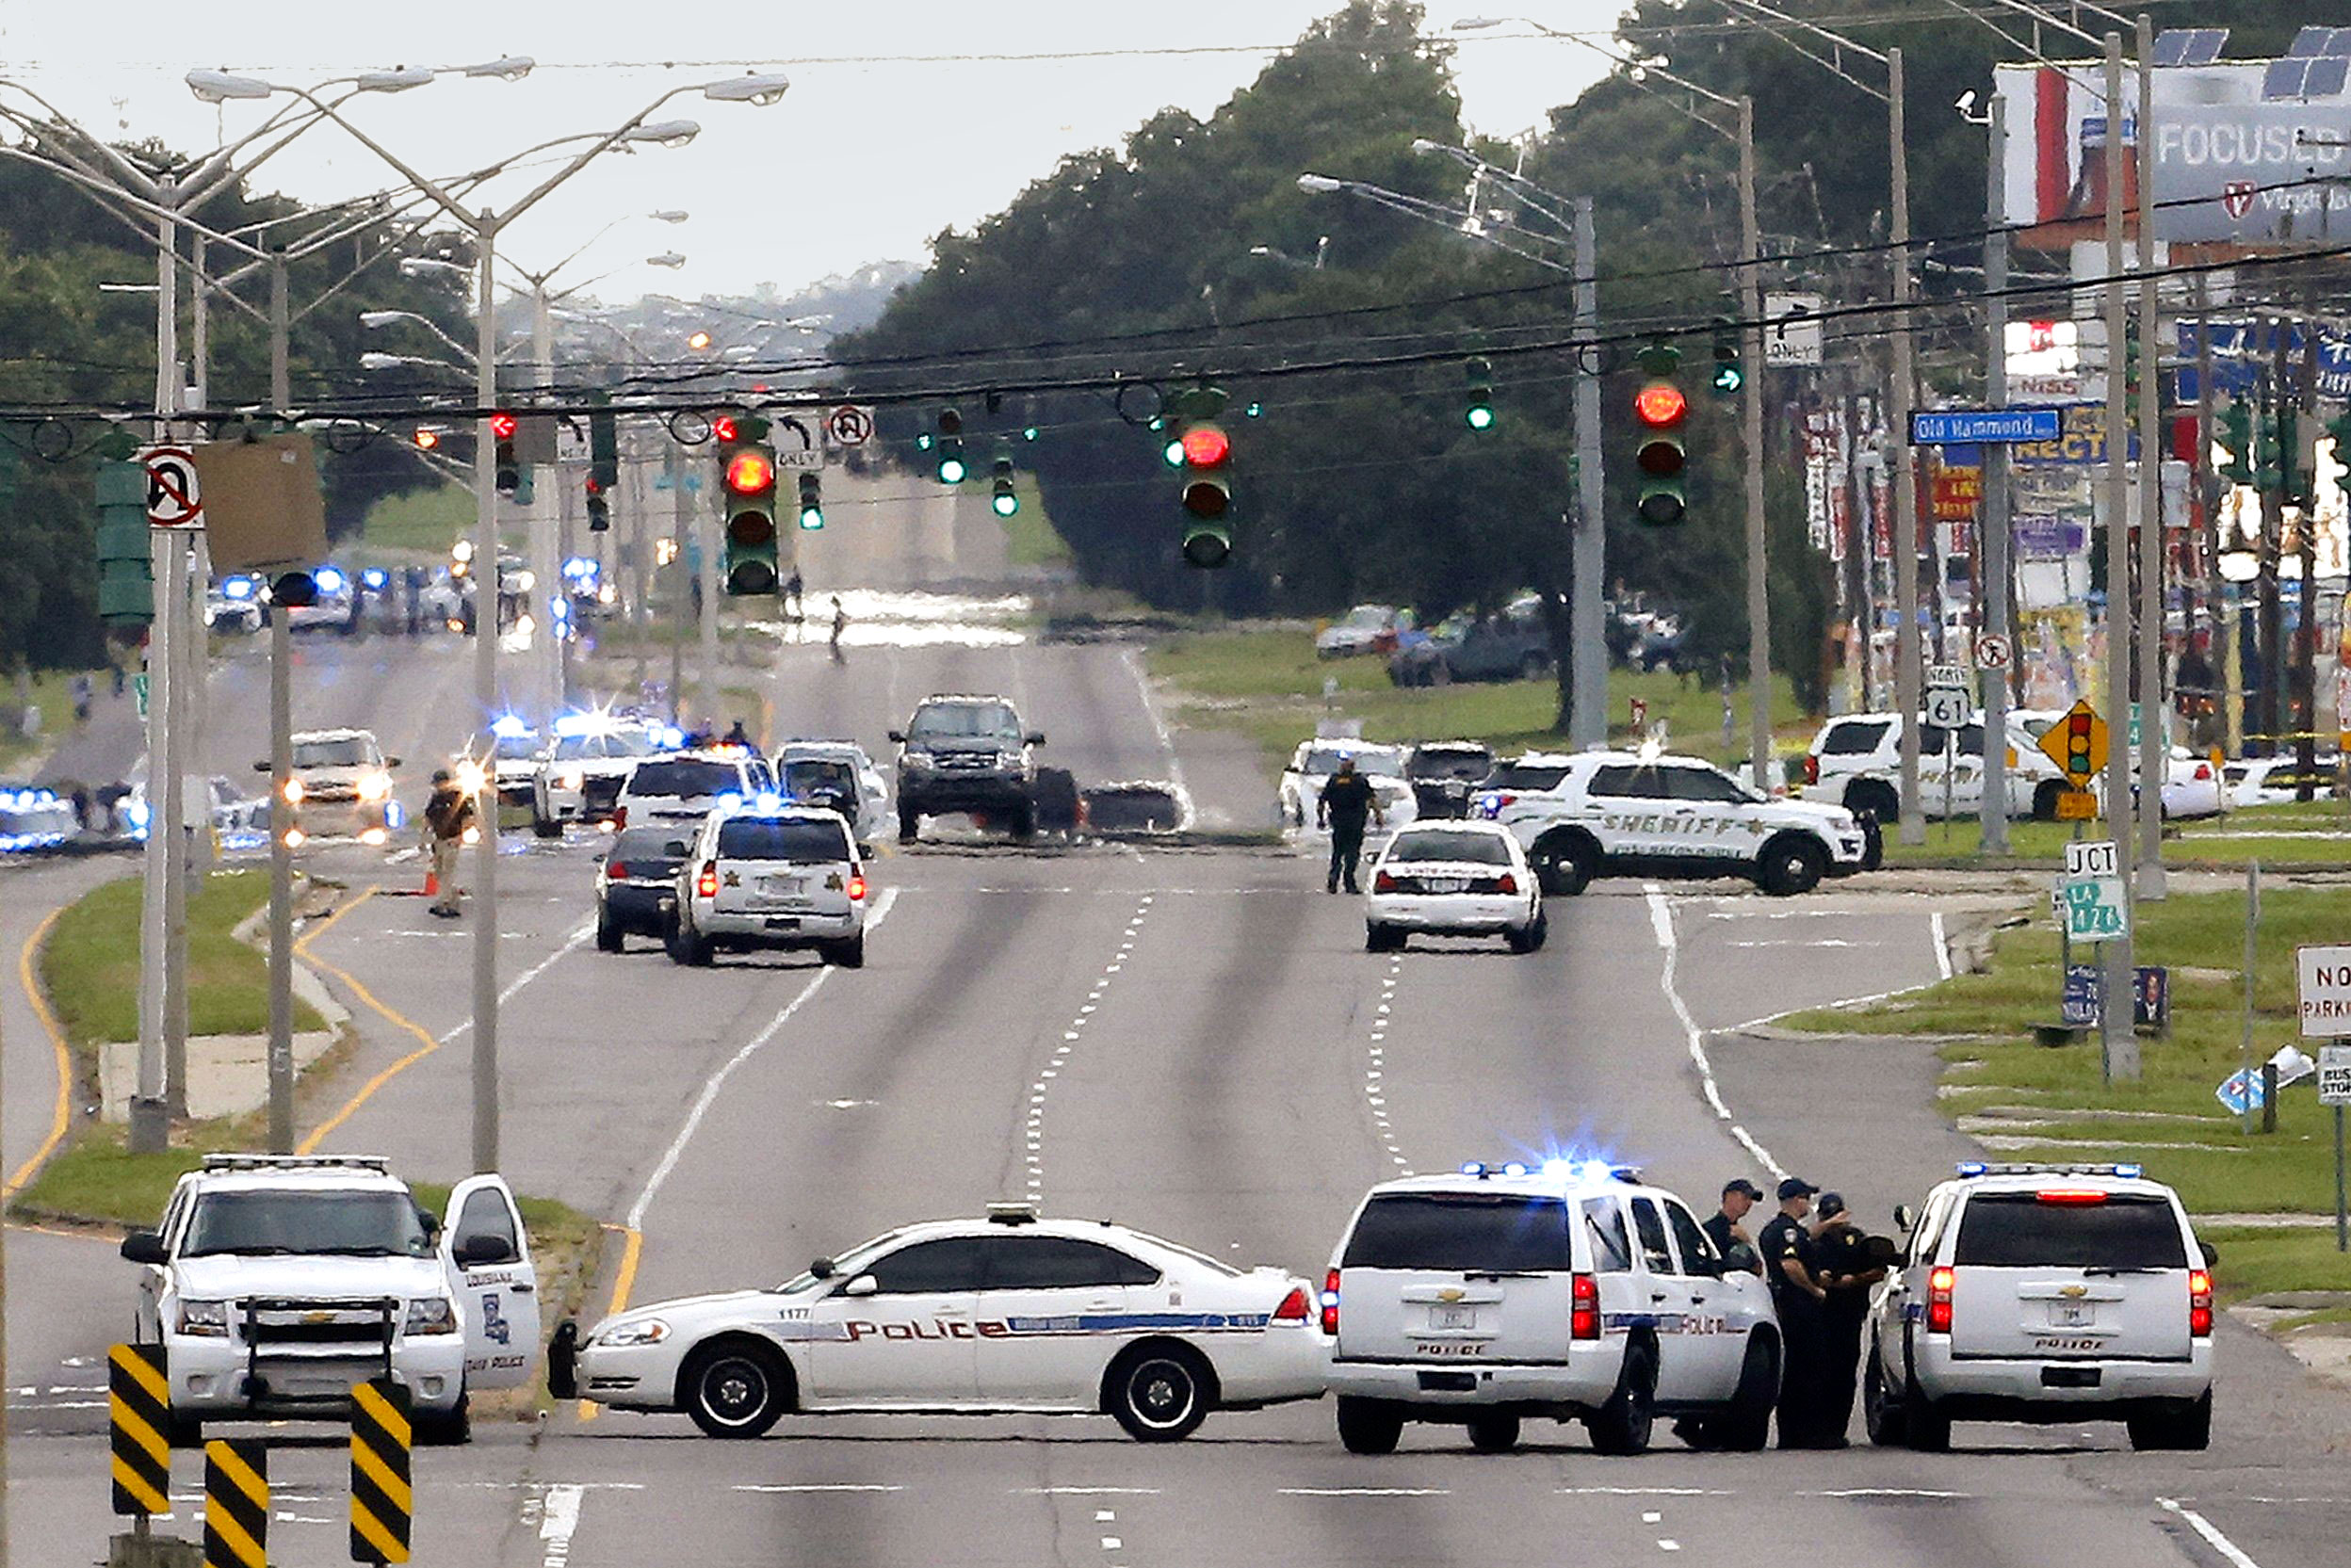 On July 17, police responded to the fatal shooting of three officers in Baton Rouge (JONATHAN BACHMAN—REUTERS)